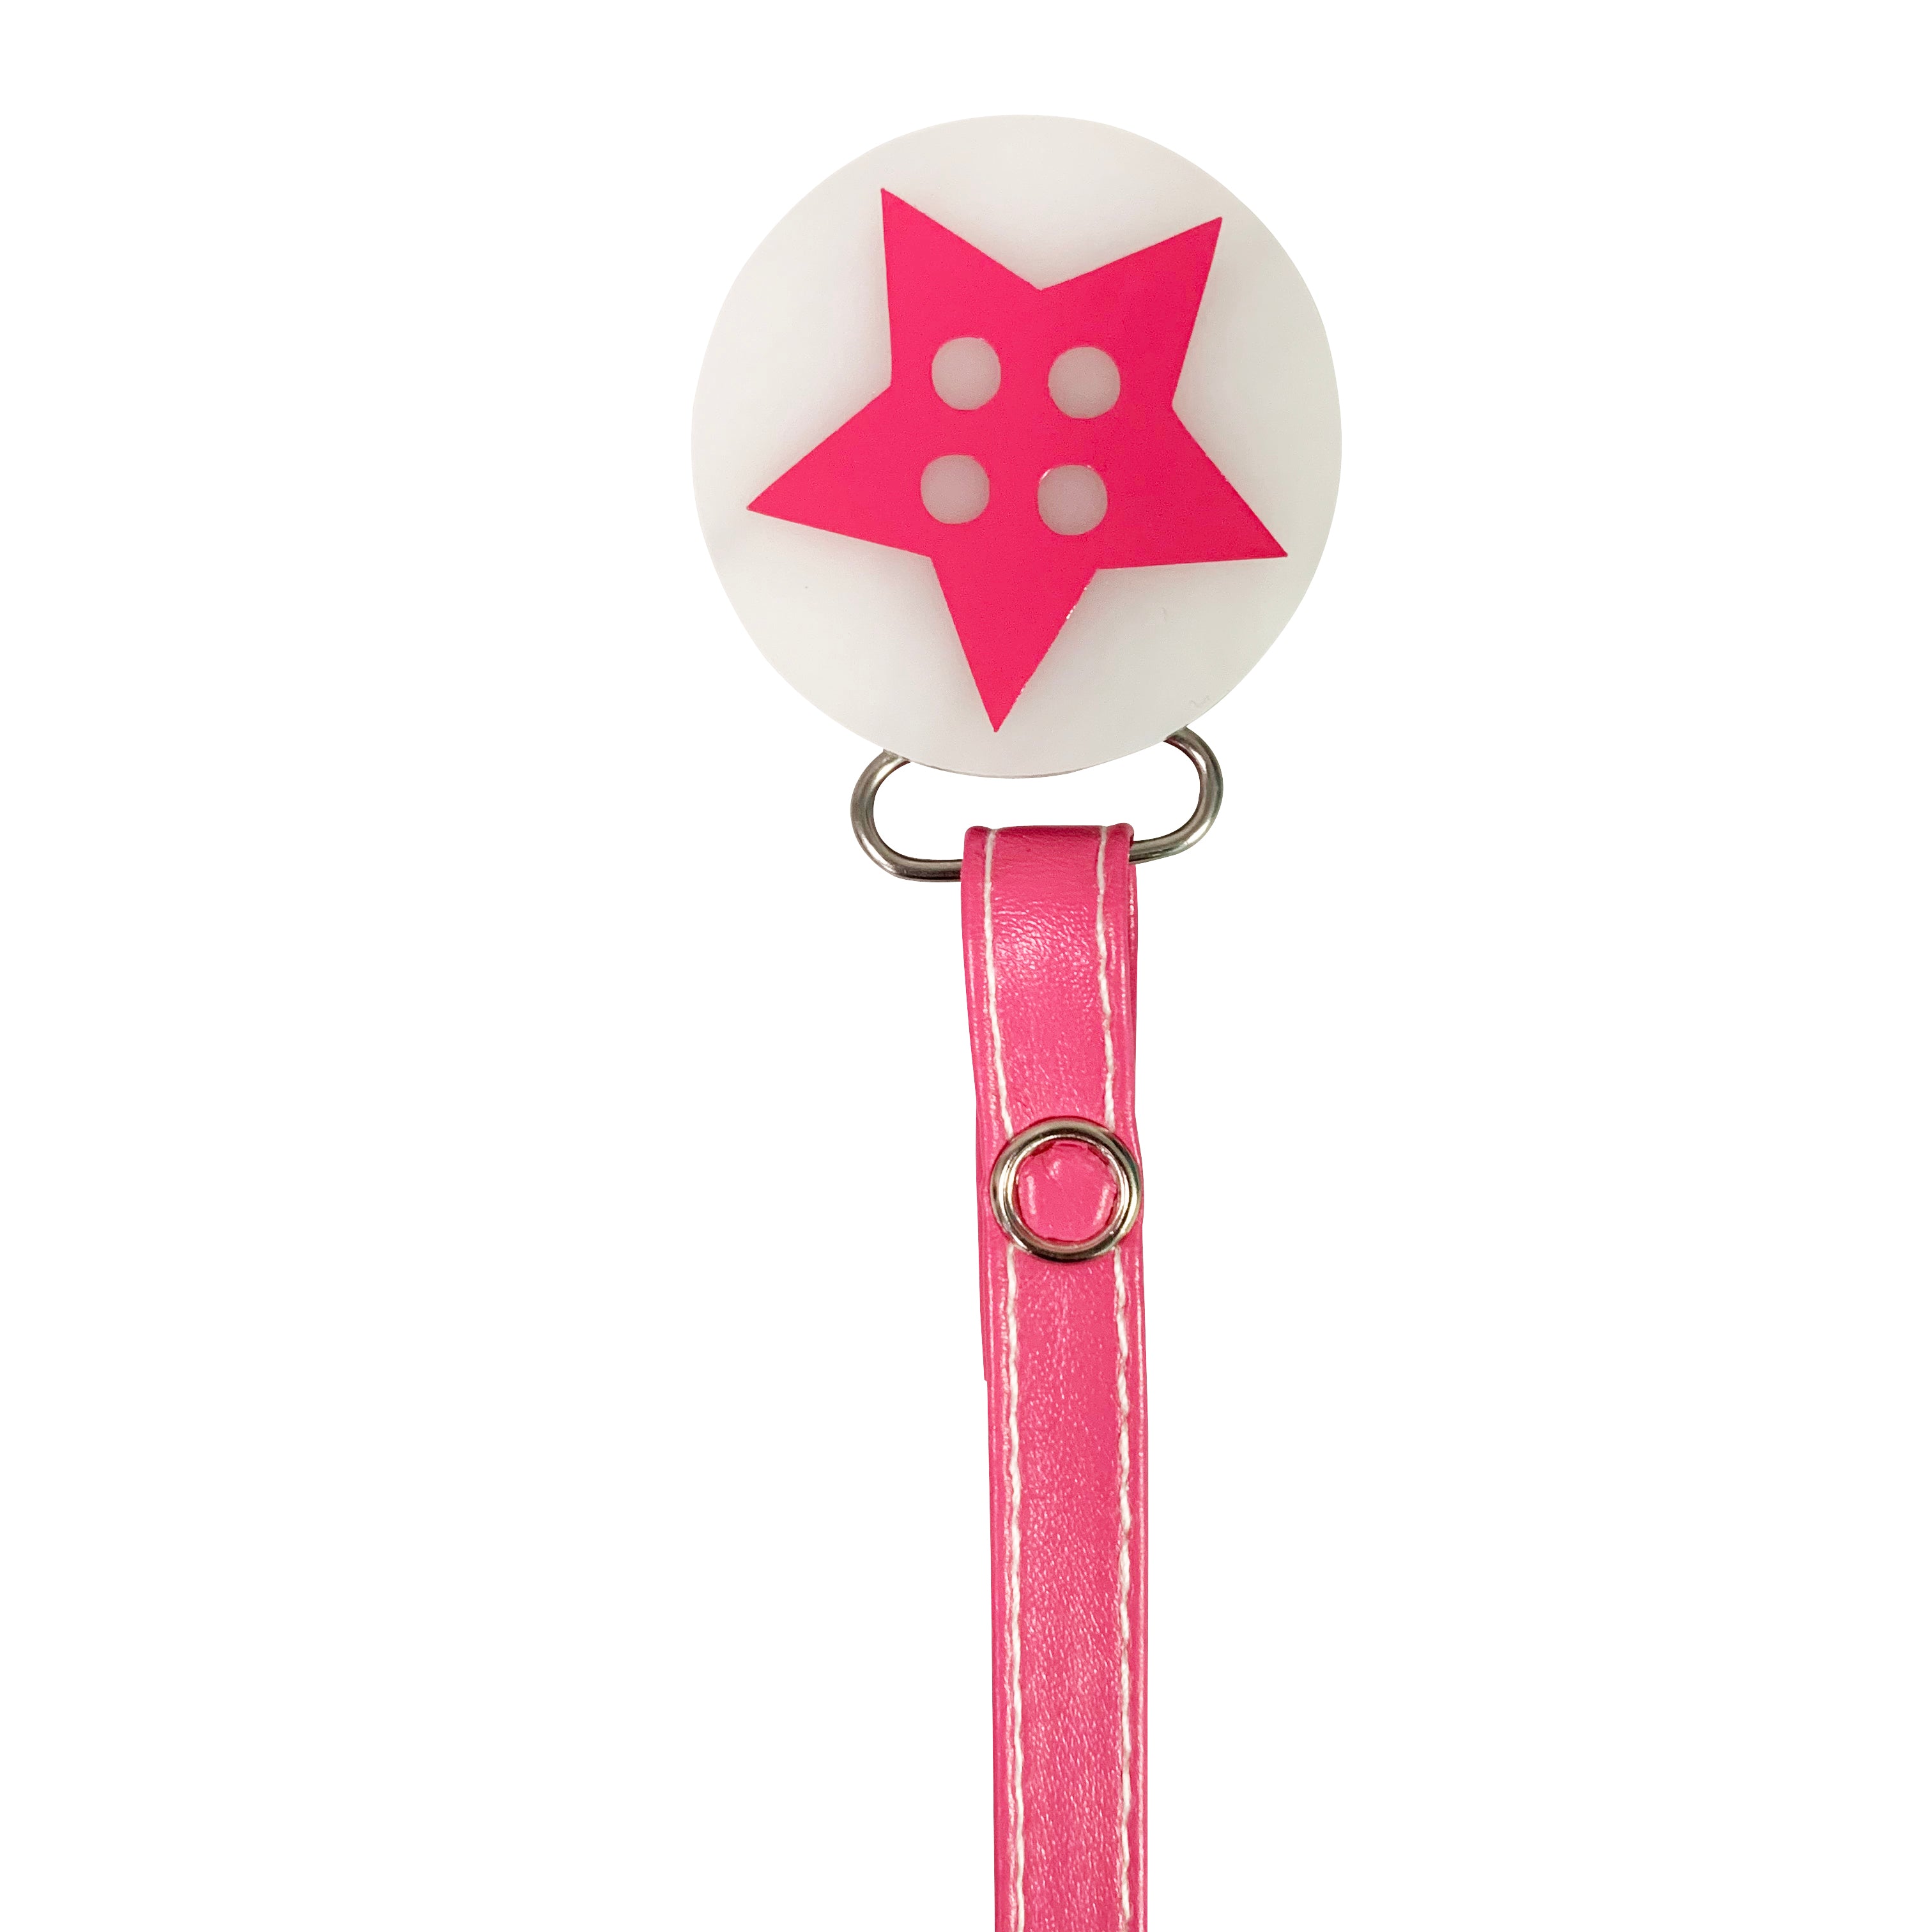 Classy Paci fun "cute as a button" Pink star, denim/black for baby toddler girls  pacifier clip